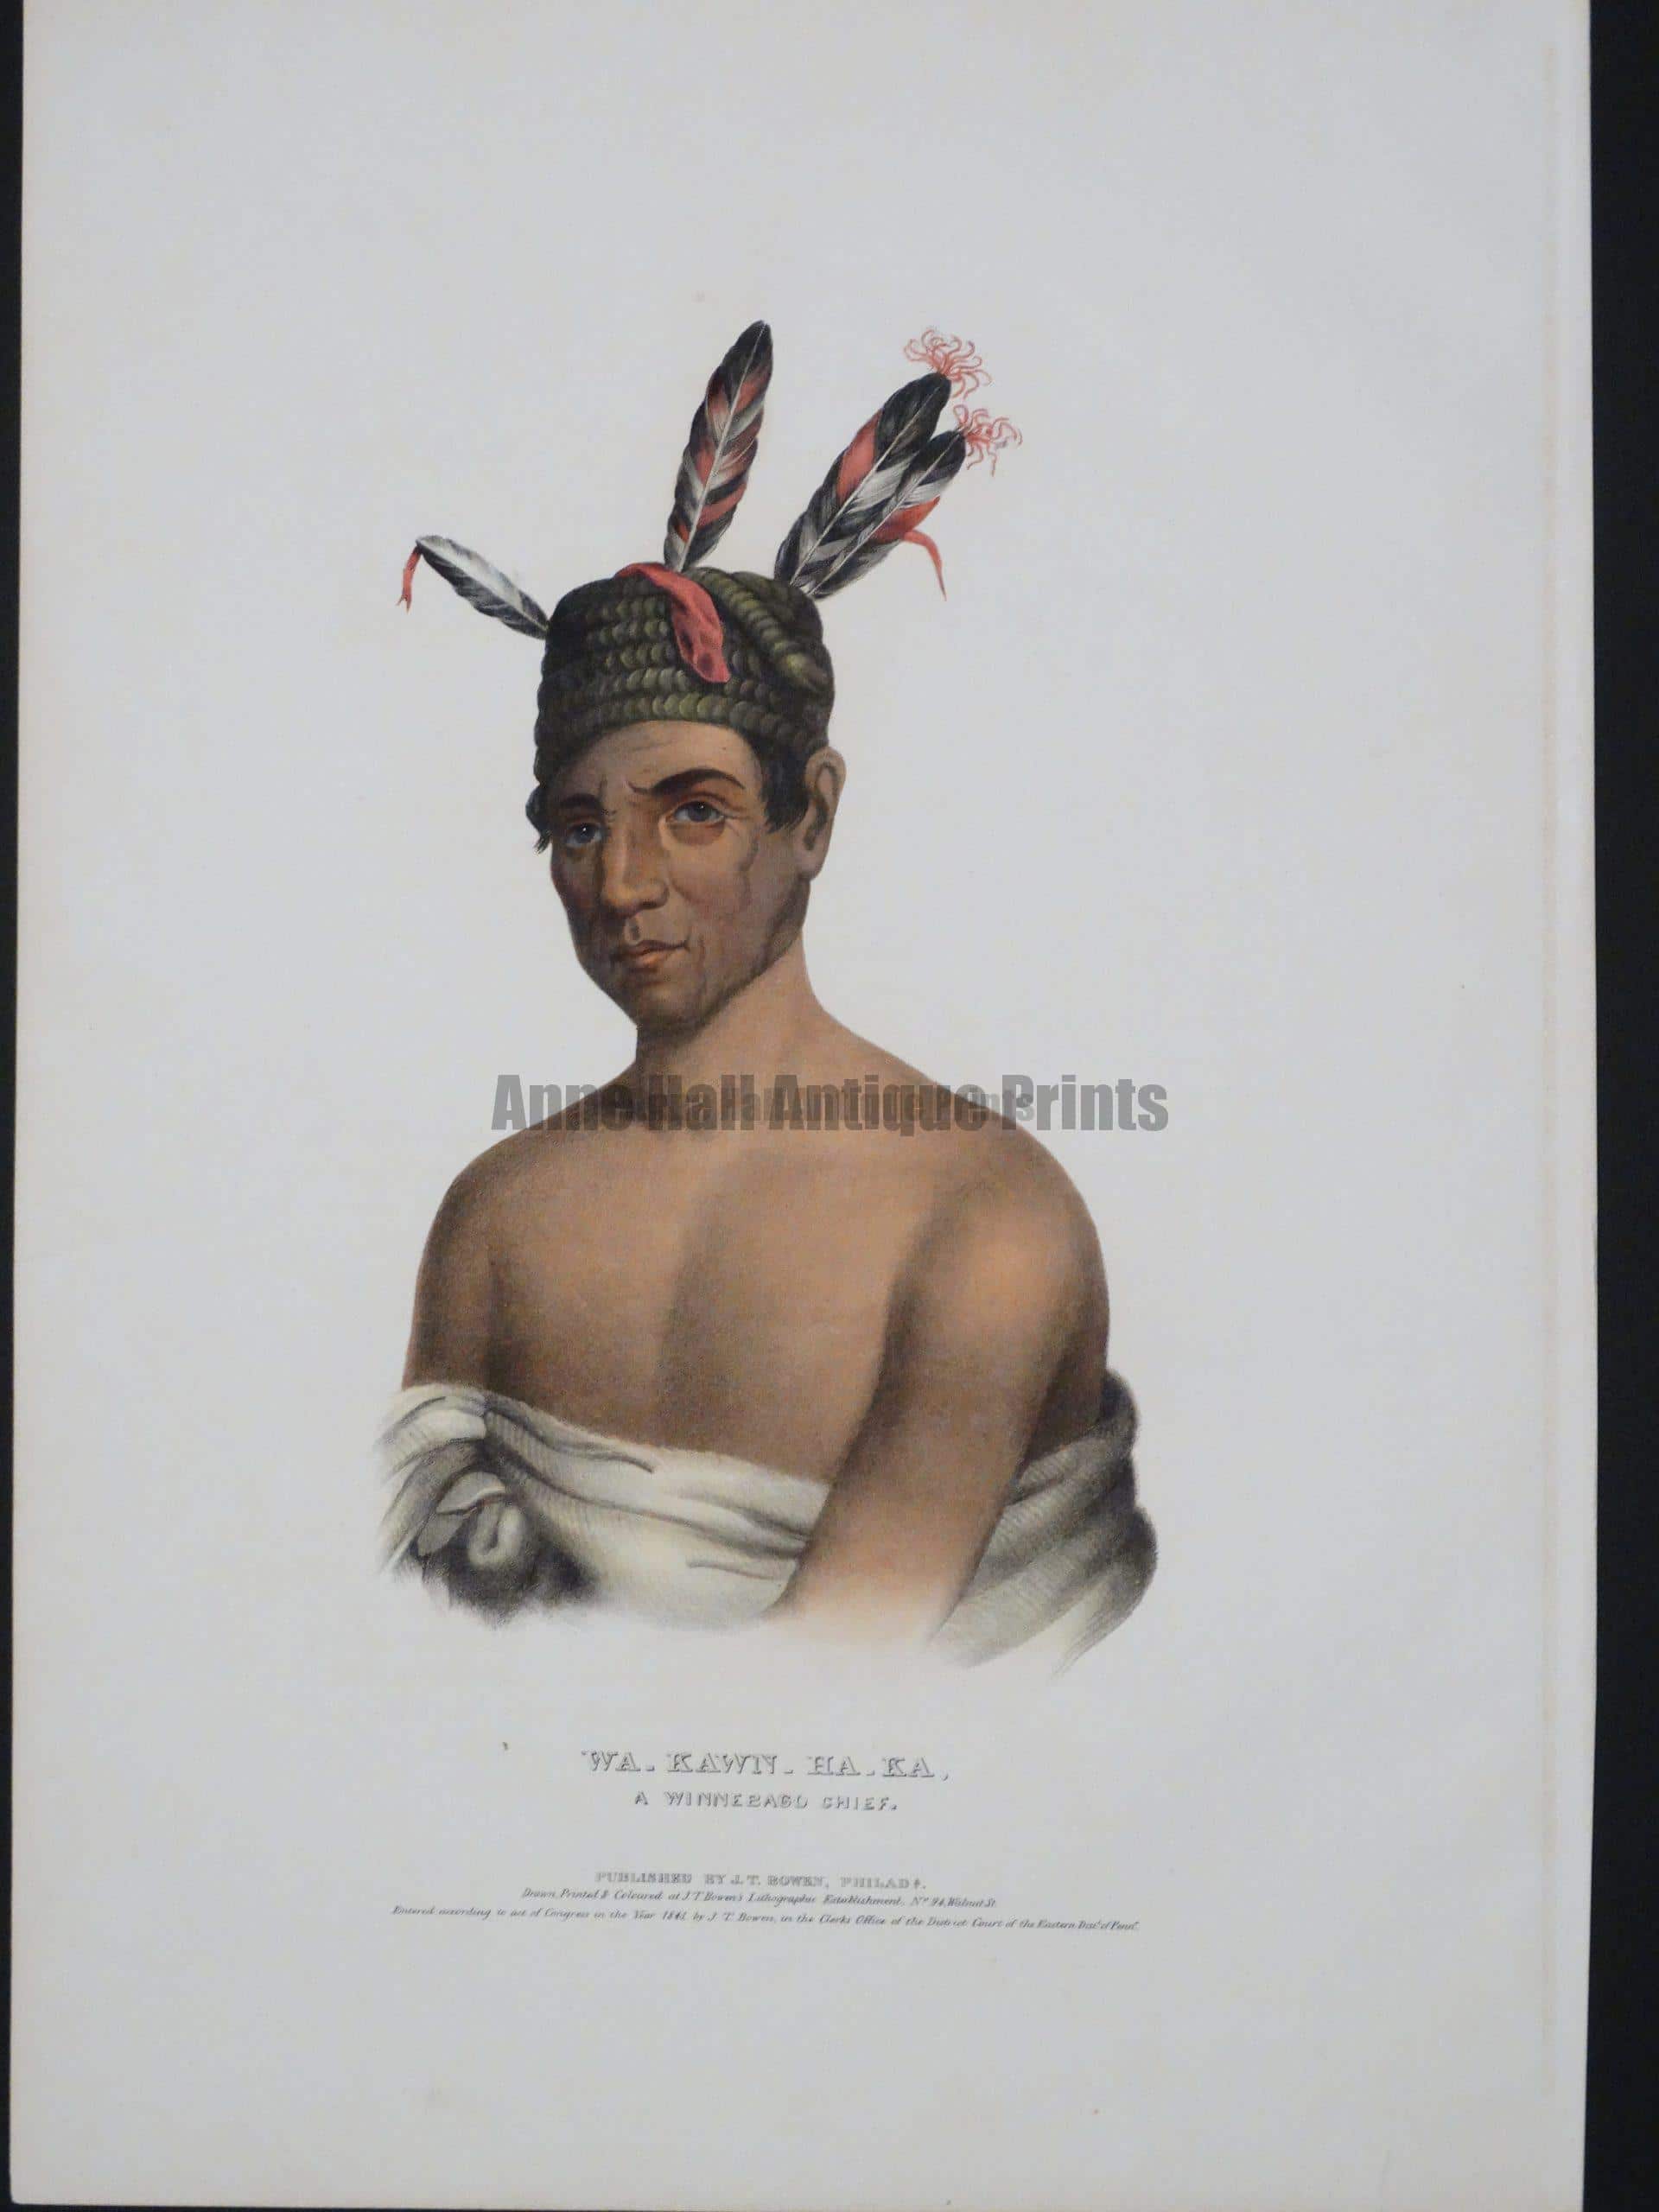 An original hand-colored lithograph, American-Indian, folio McKenney & Hall. four feathers up, in head-dress. "Blanket warrior"